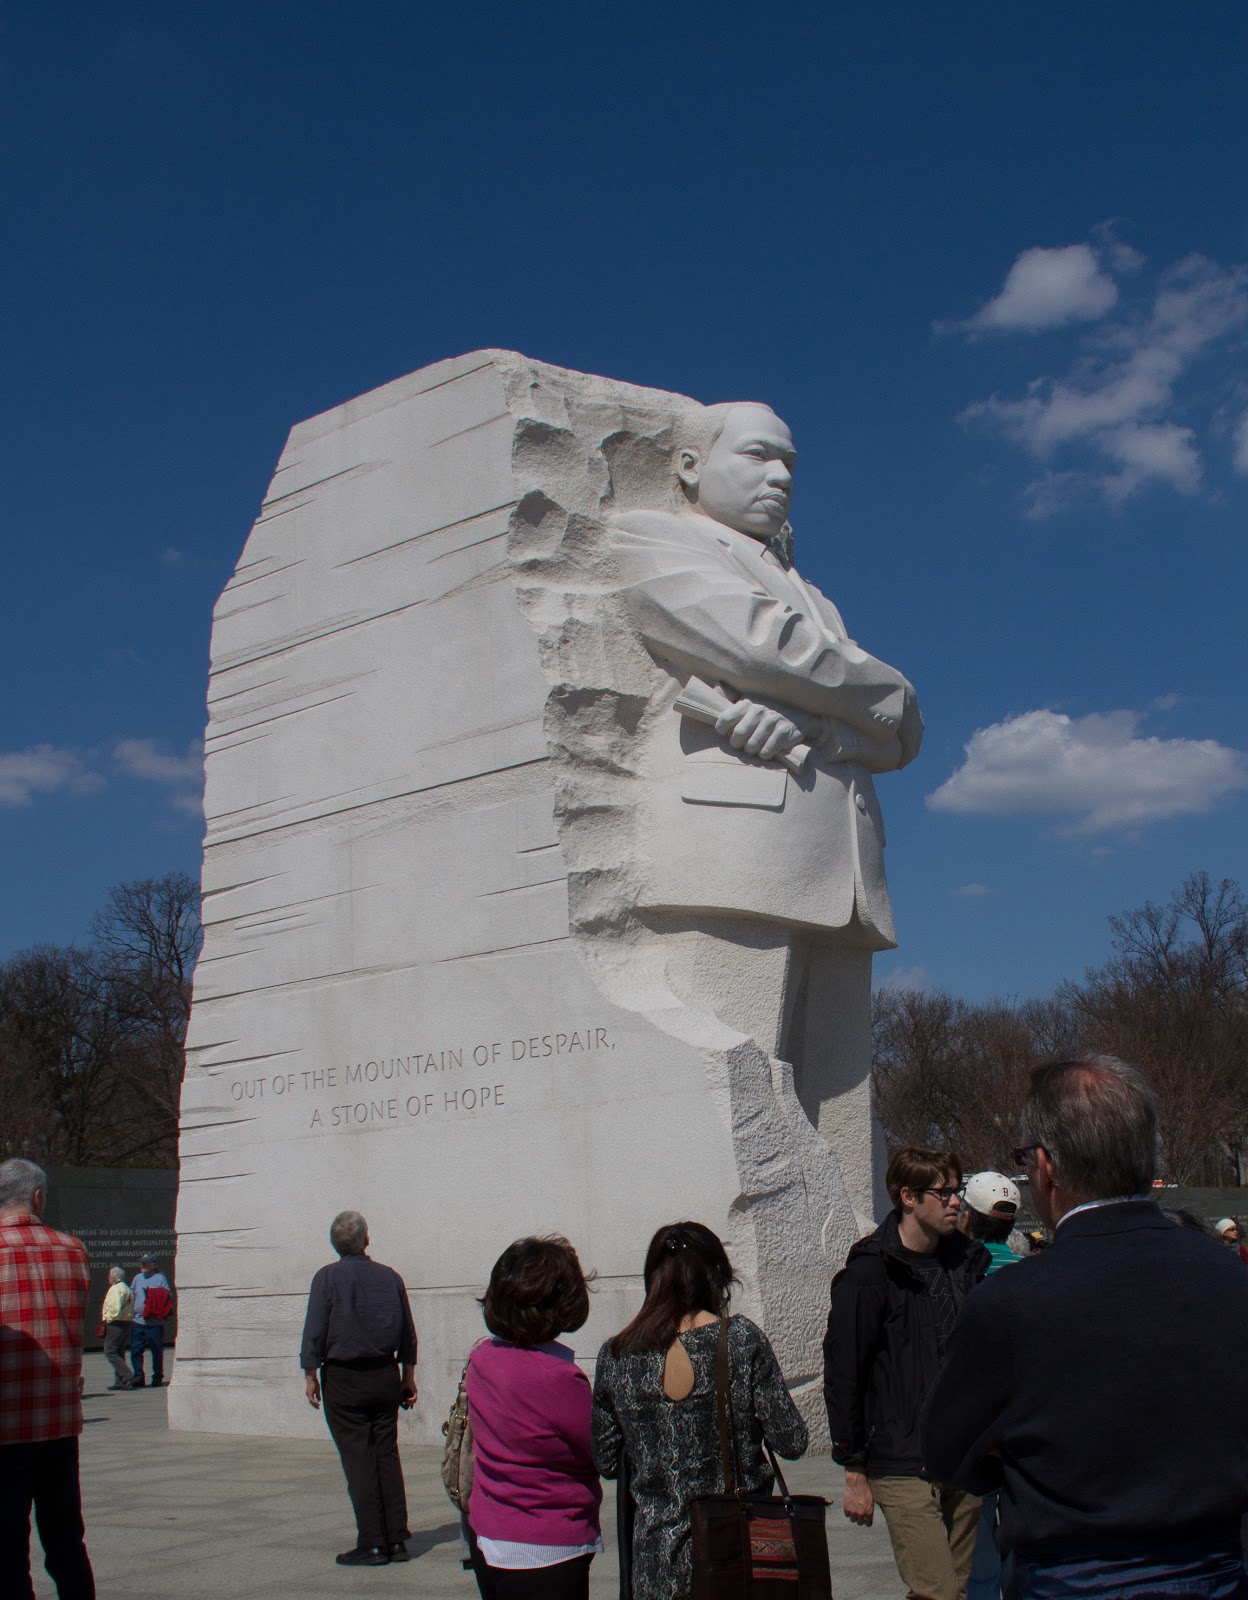 Is Martin Luther King emerging from the rock or is he held in place by it?